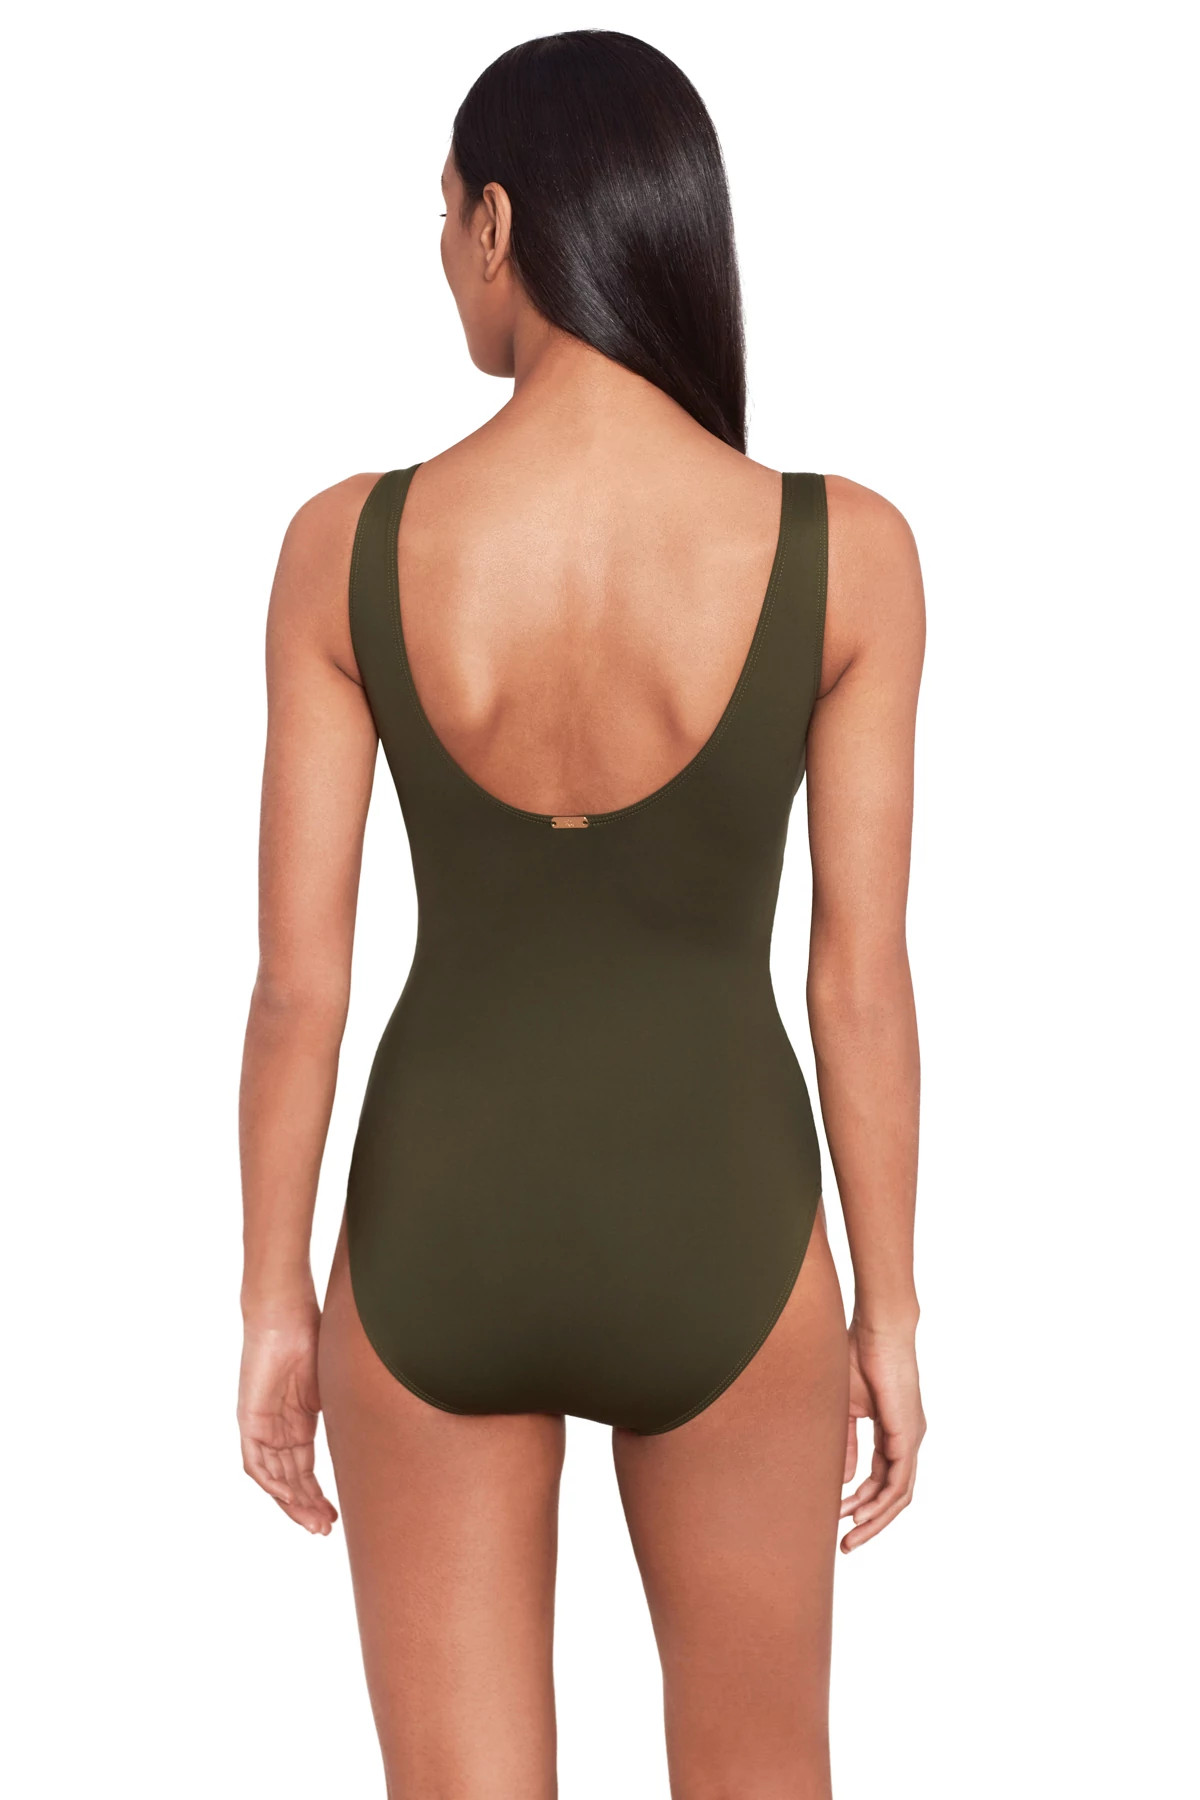 OLIVE Ruffle Over The Shoulder One Piece Swimsuit image number 2